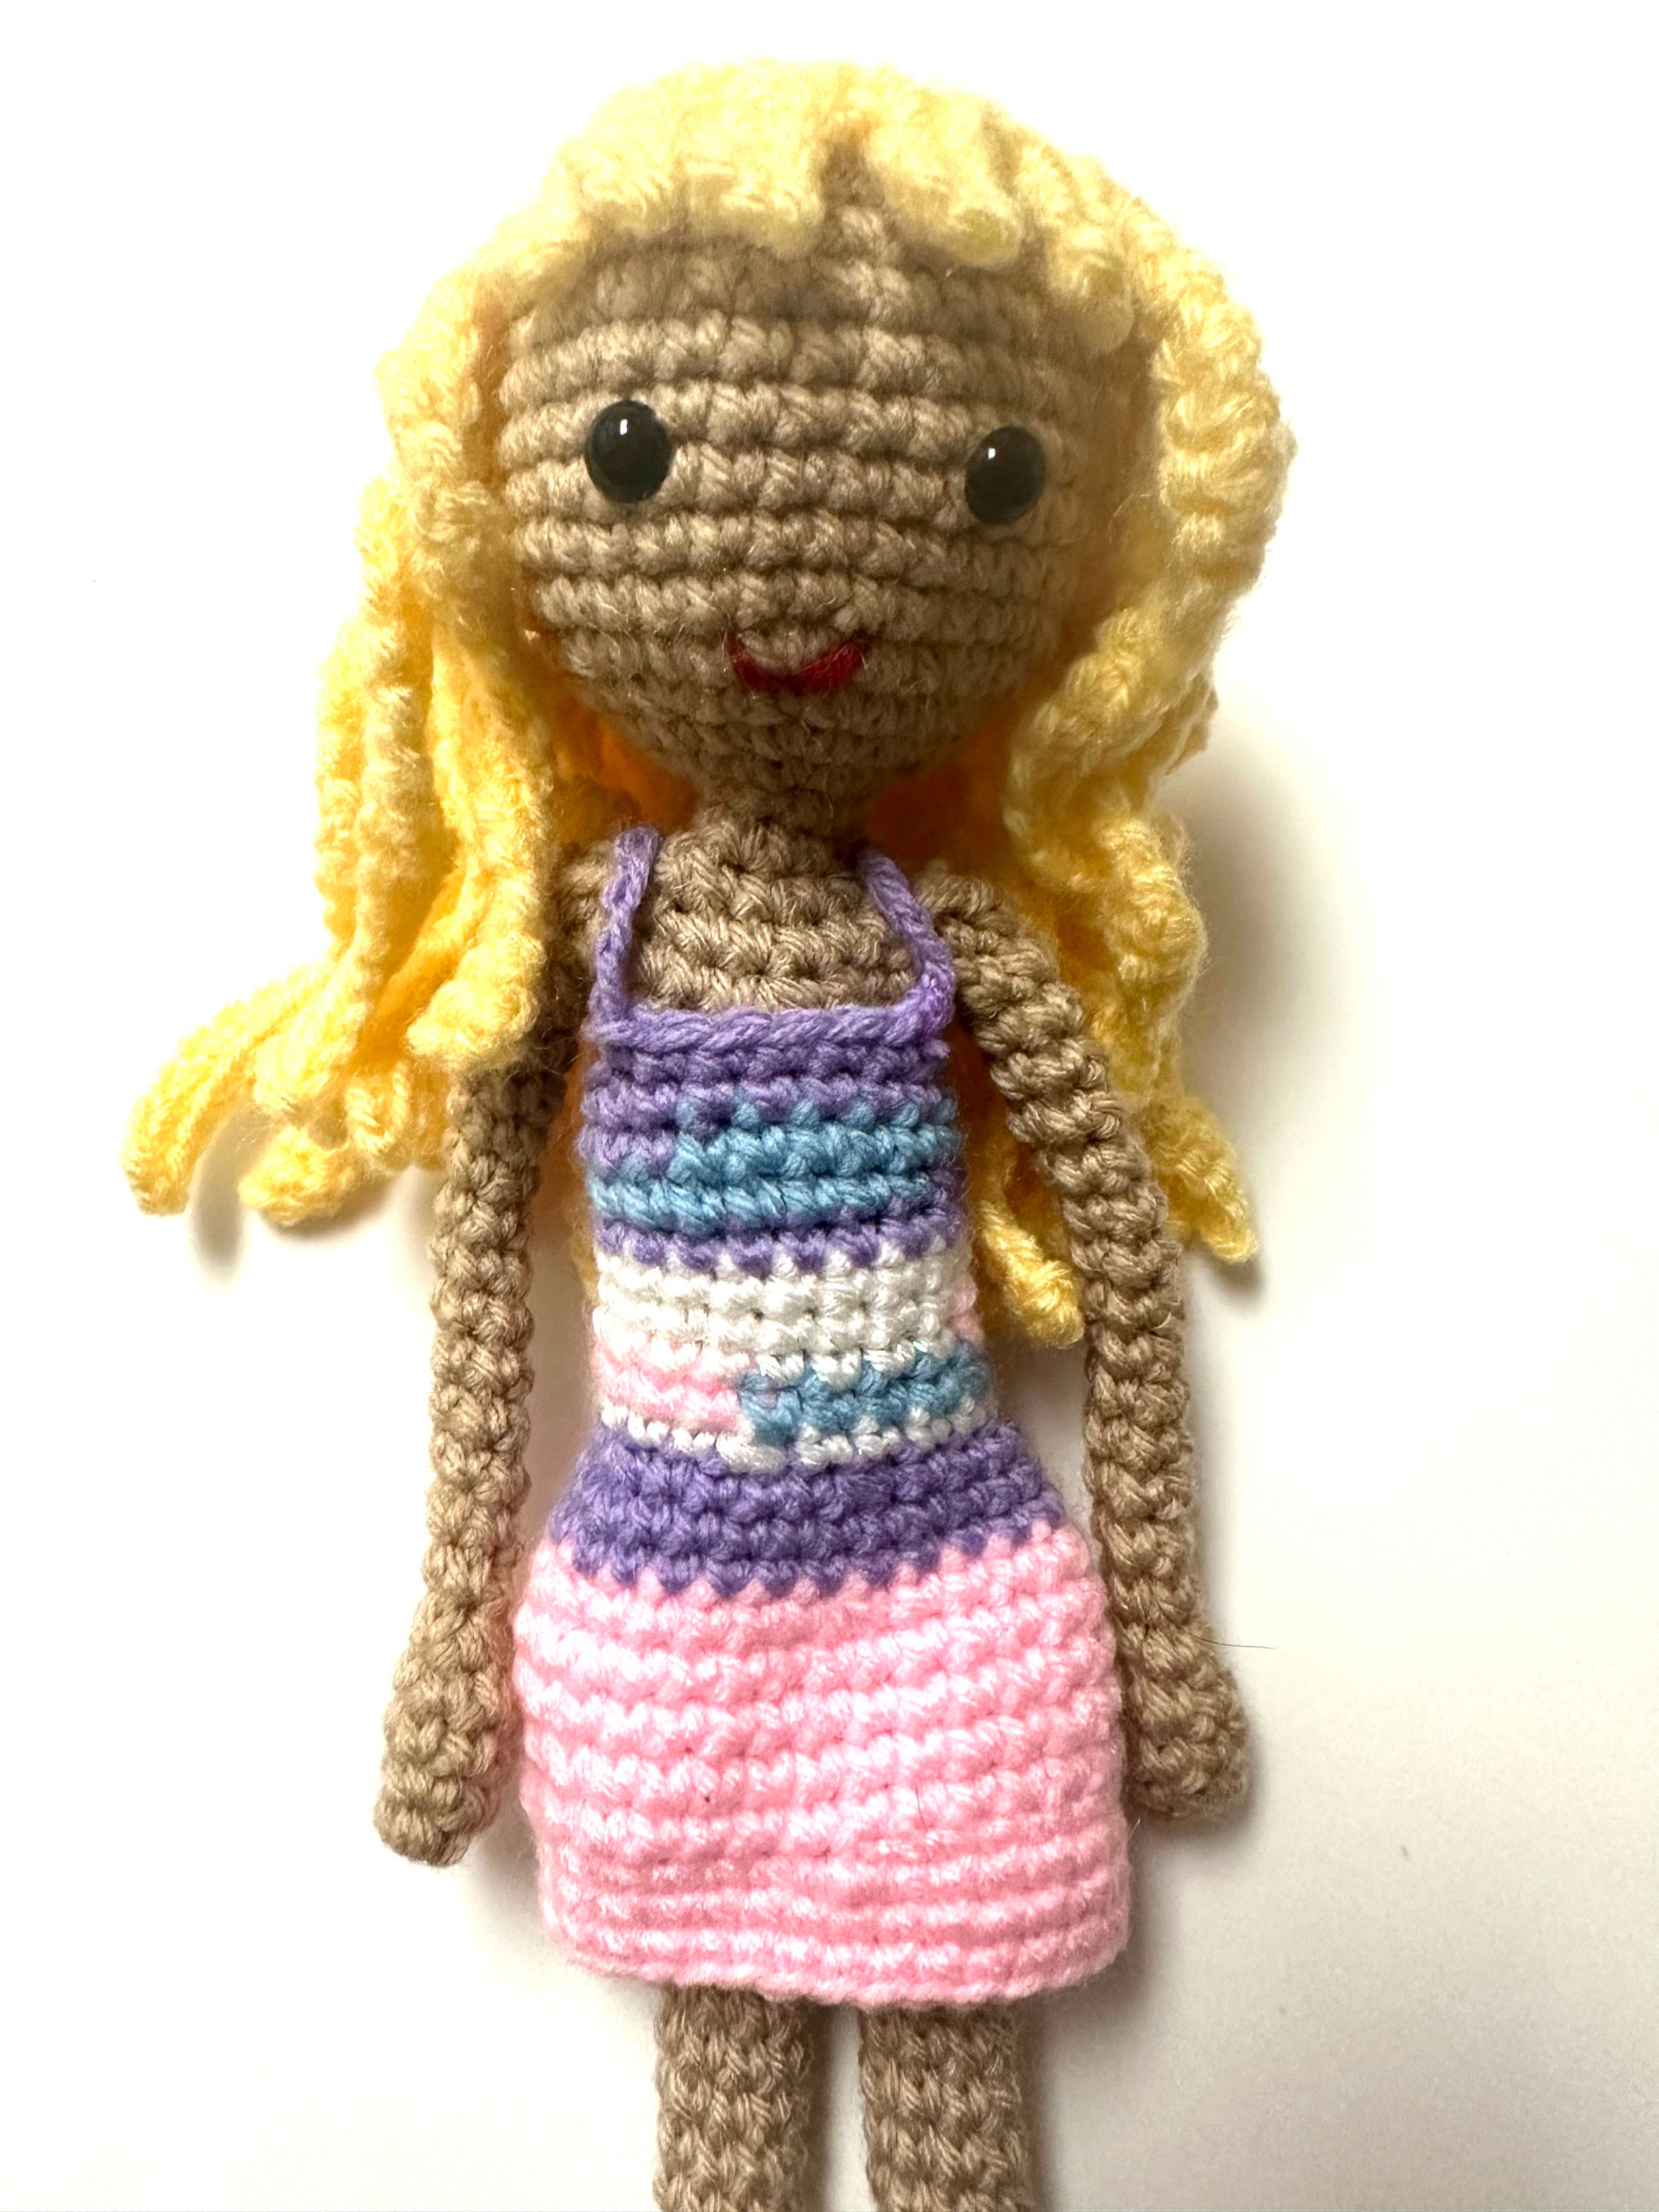  Unofficial Taylor Swift Crochet Kit: Includes Everything to  Make a Taylor Swift Amigurumi Doll!: 9780785844181: Galusz, Katalin: Books